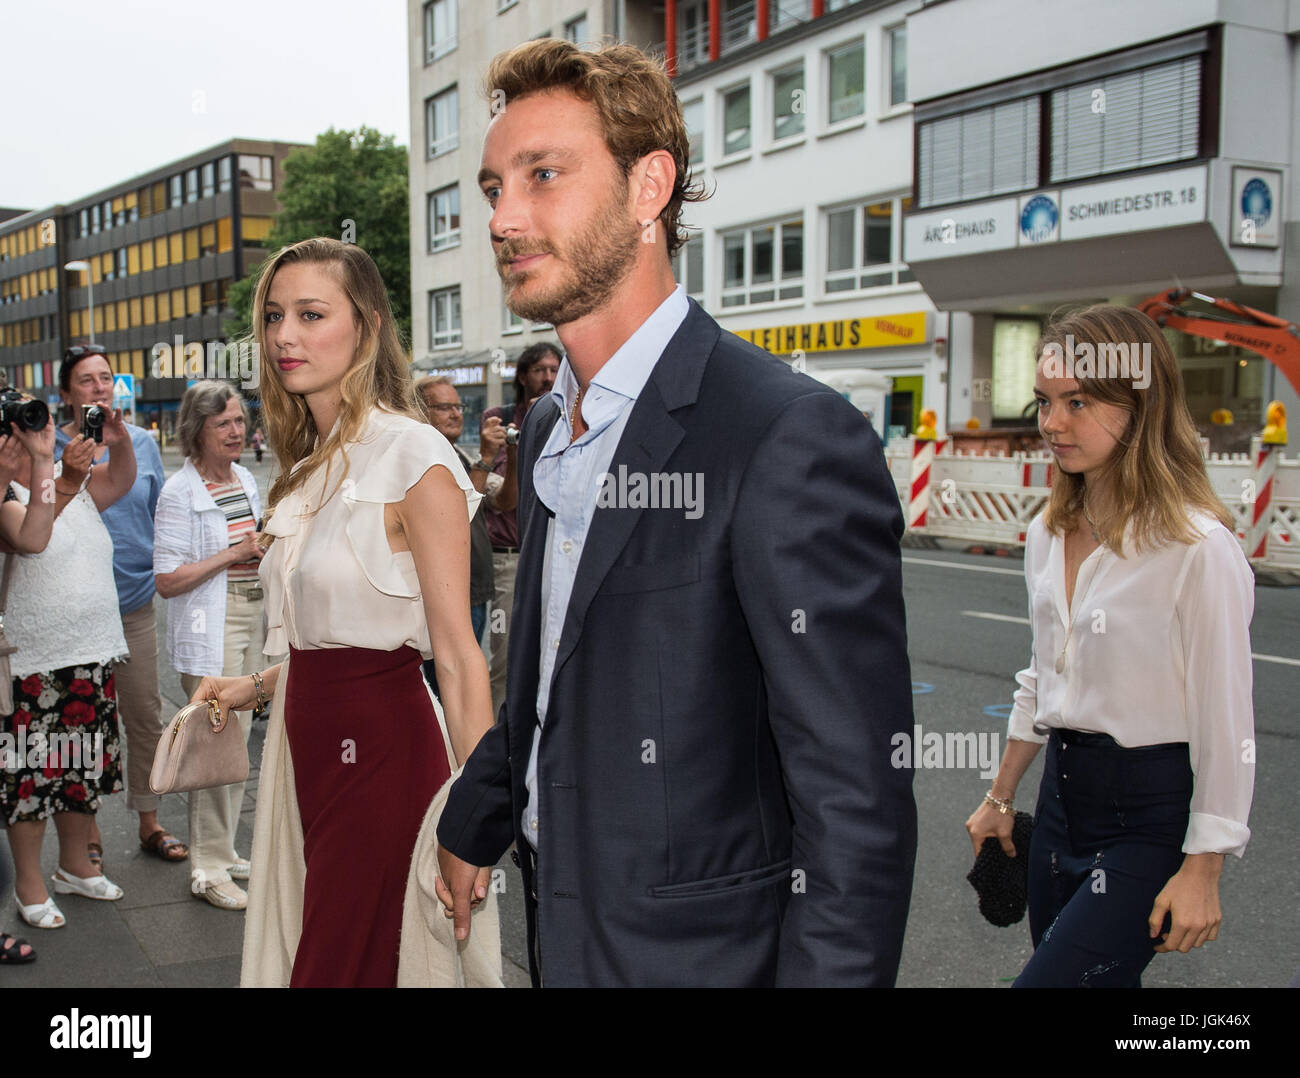 Hanover, Germany. 7th July, 2017. Pierre Casiraghi, son of Princess Caroline, his wife, Duchess Beatrice Boromeo (l) and his sister Princess Alexandra of Hanover (r) arrive at the Brauhaus Ernst August berwery in Hanover, Germany, 7 July 2017. Prince Ernst August of Hanover of the House of Welf celebrates his wedding-eve party at the brewery. Photo: Silas Stein/dpa/Alamy Live News Stock Photo